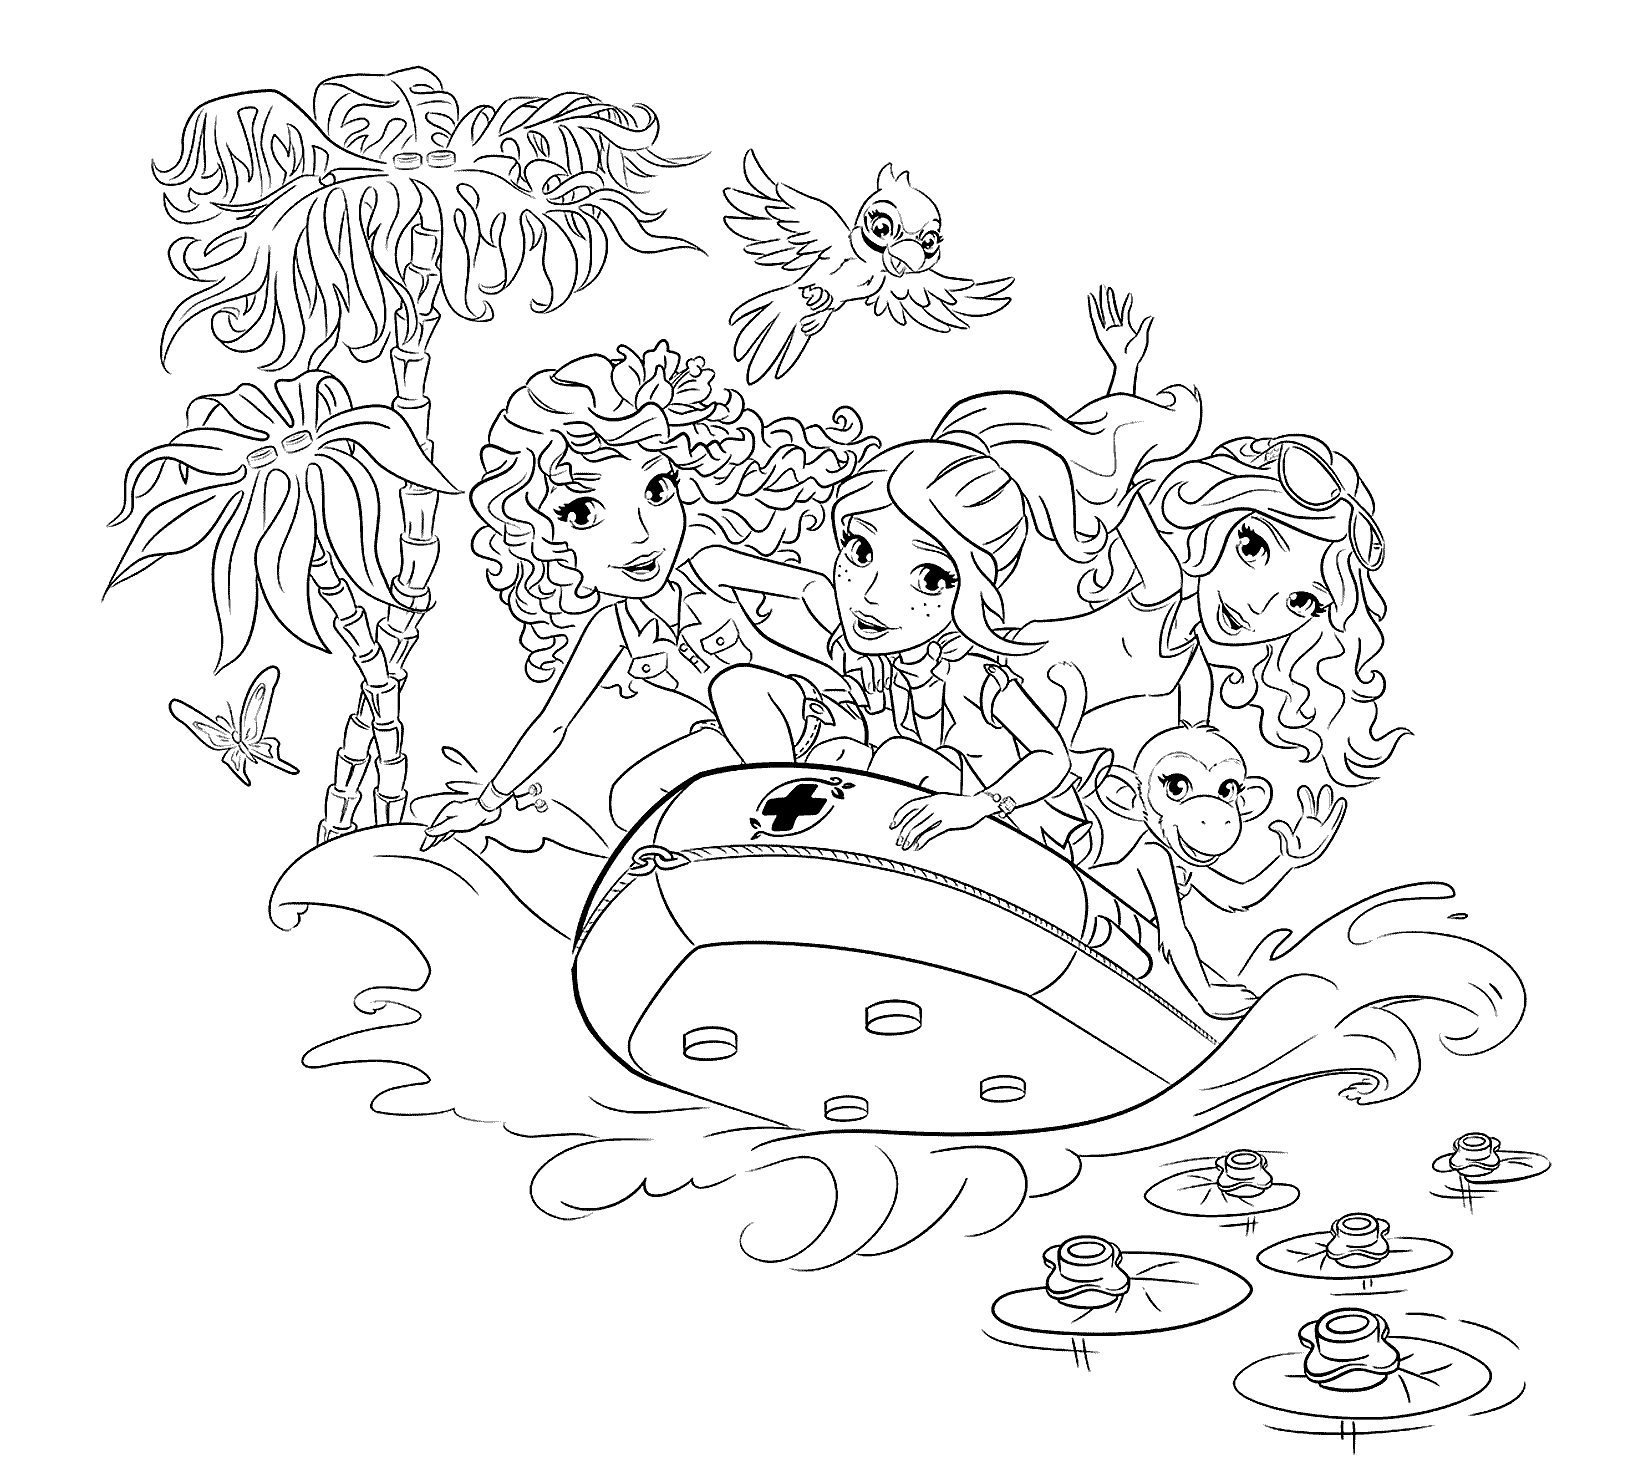 Lego Rubber Boat Coloring Page For Girls Printable Free Lego Friends Lego Coloring Pa